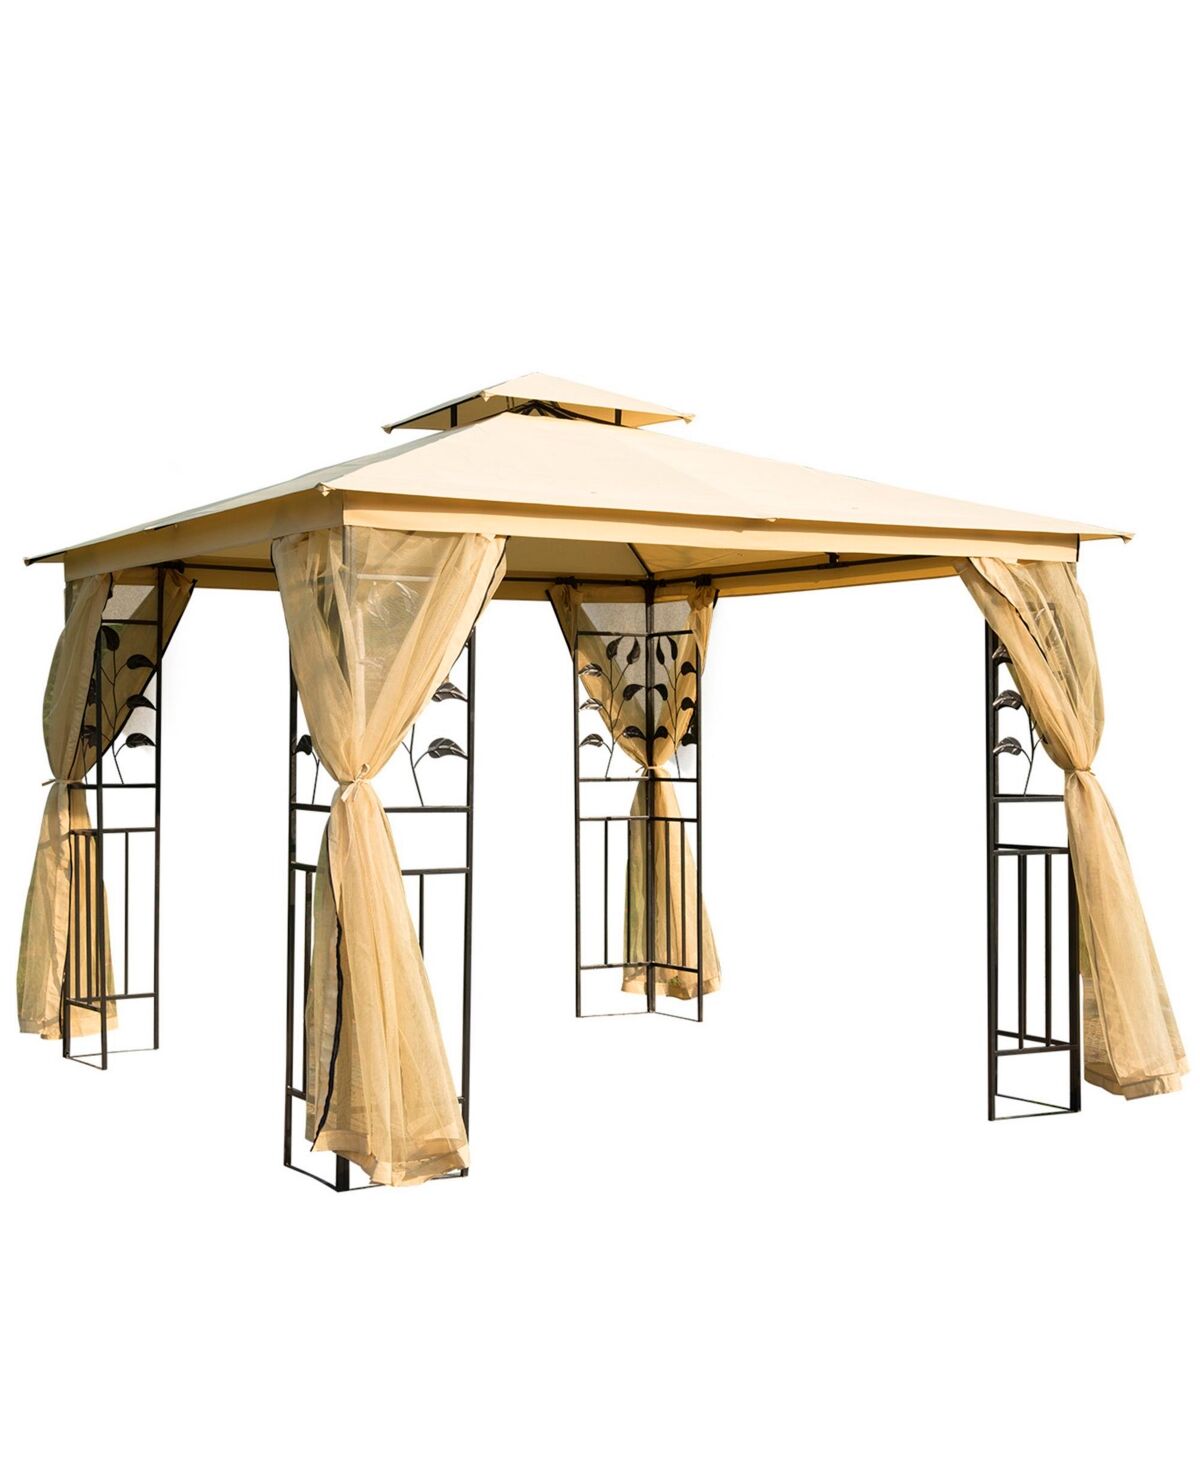 Outsunny 10' x 10' Outdoor Patio Gazebo Canopy with 2-Tier Polyester Roof, Mesh Netting Sidewalls, and Steel Frame Beige - Beige/khaki